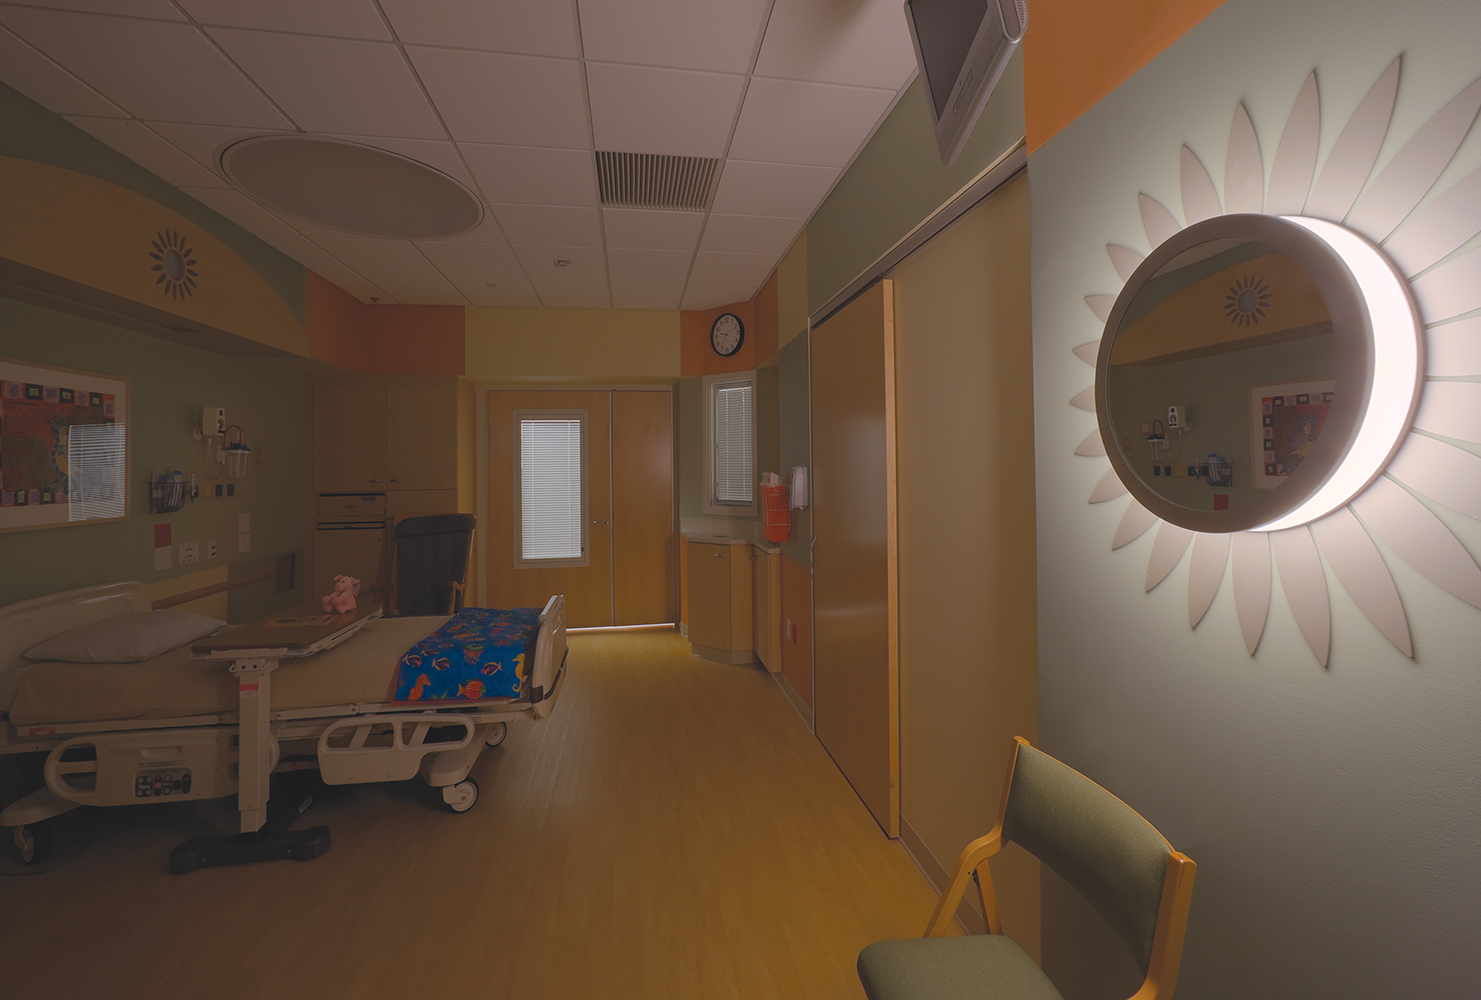 These custom light fixtures were tailored in a sunflower shape and center mirror to light up this children's hospital patient room.